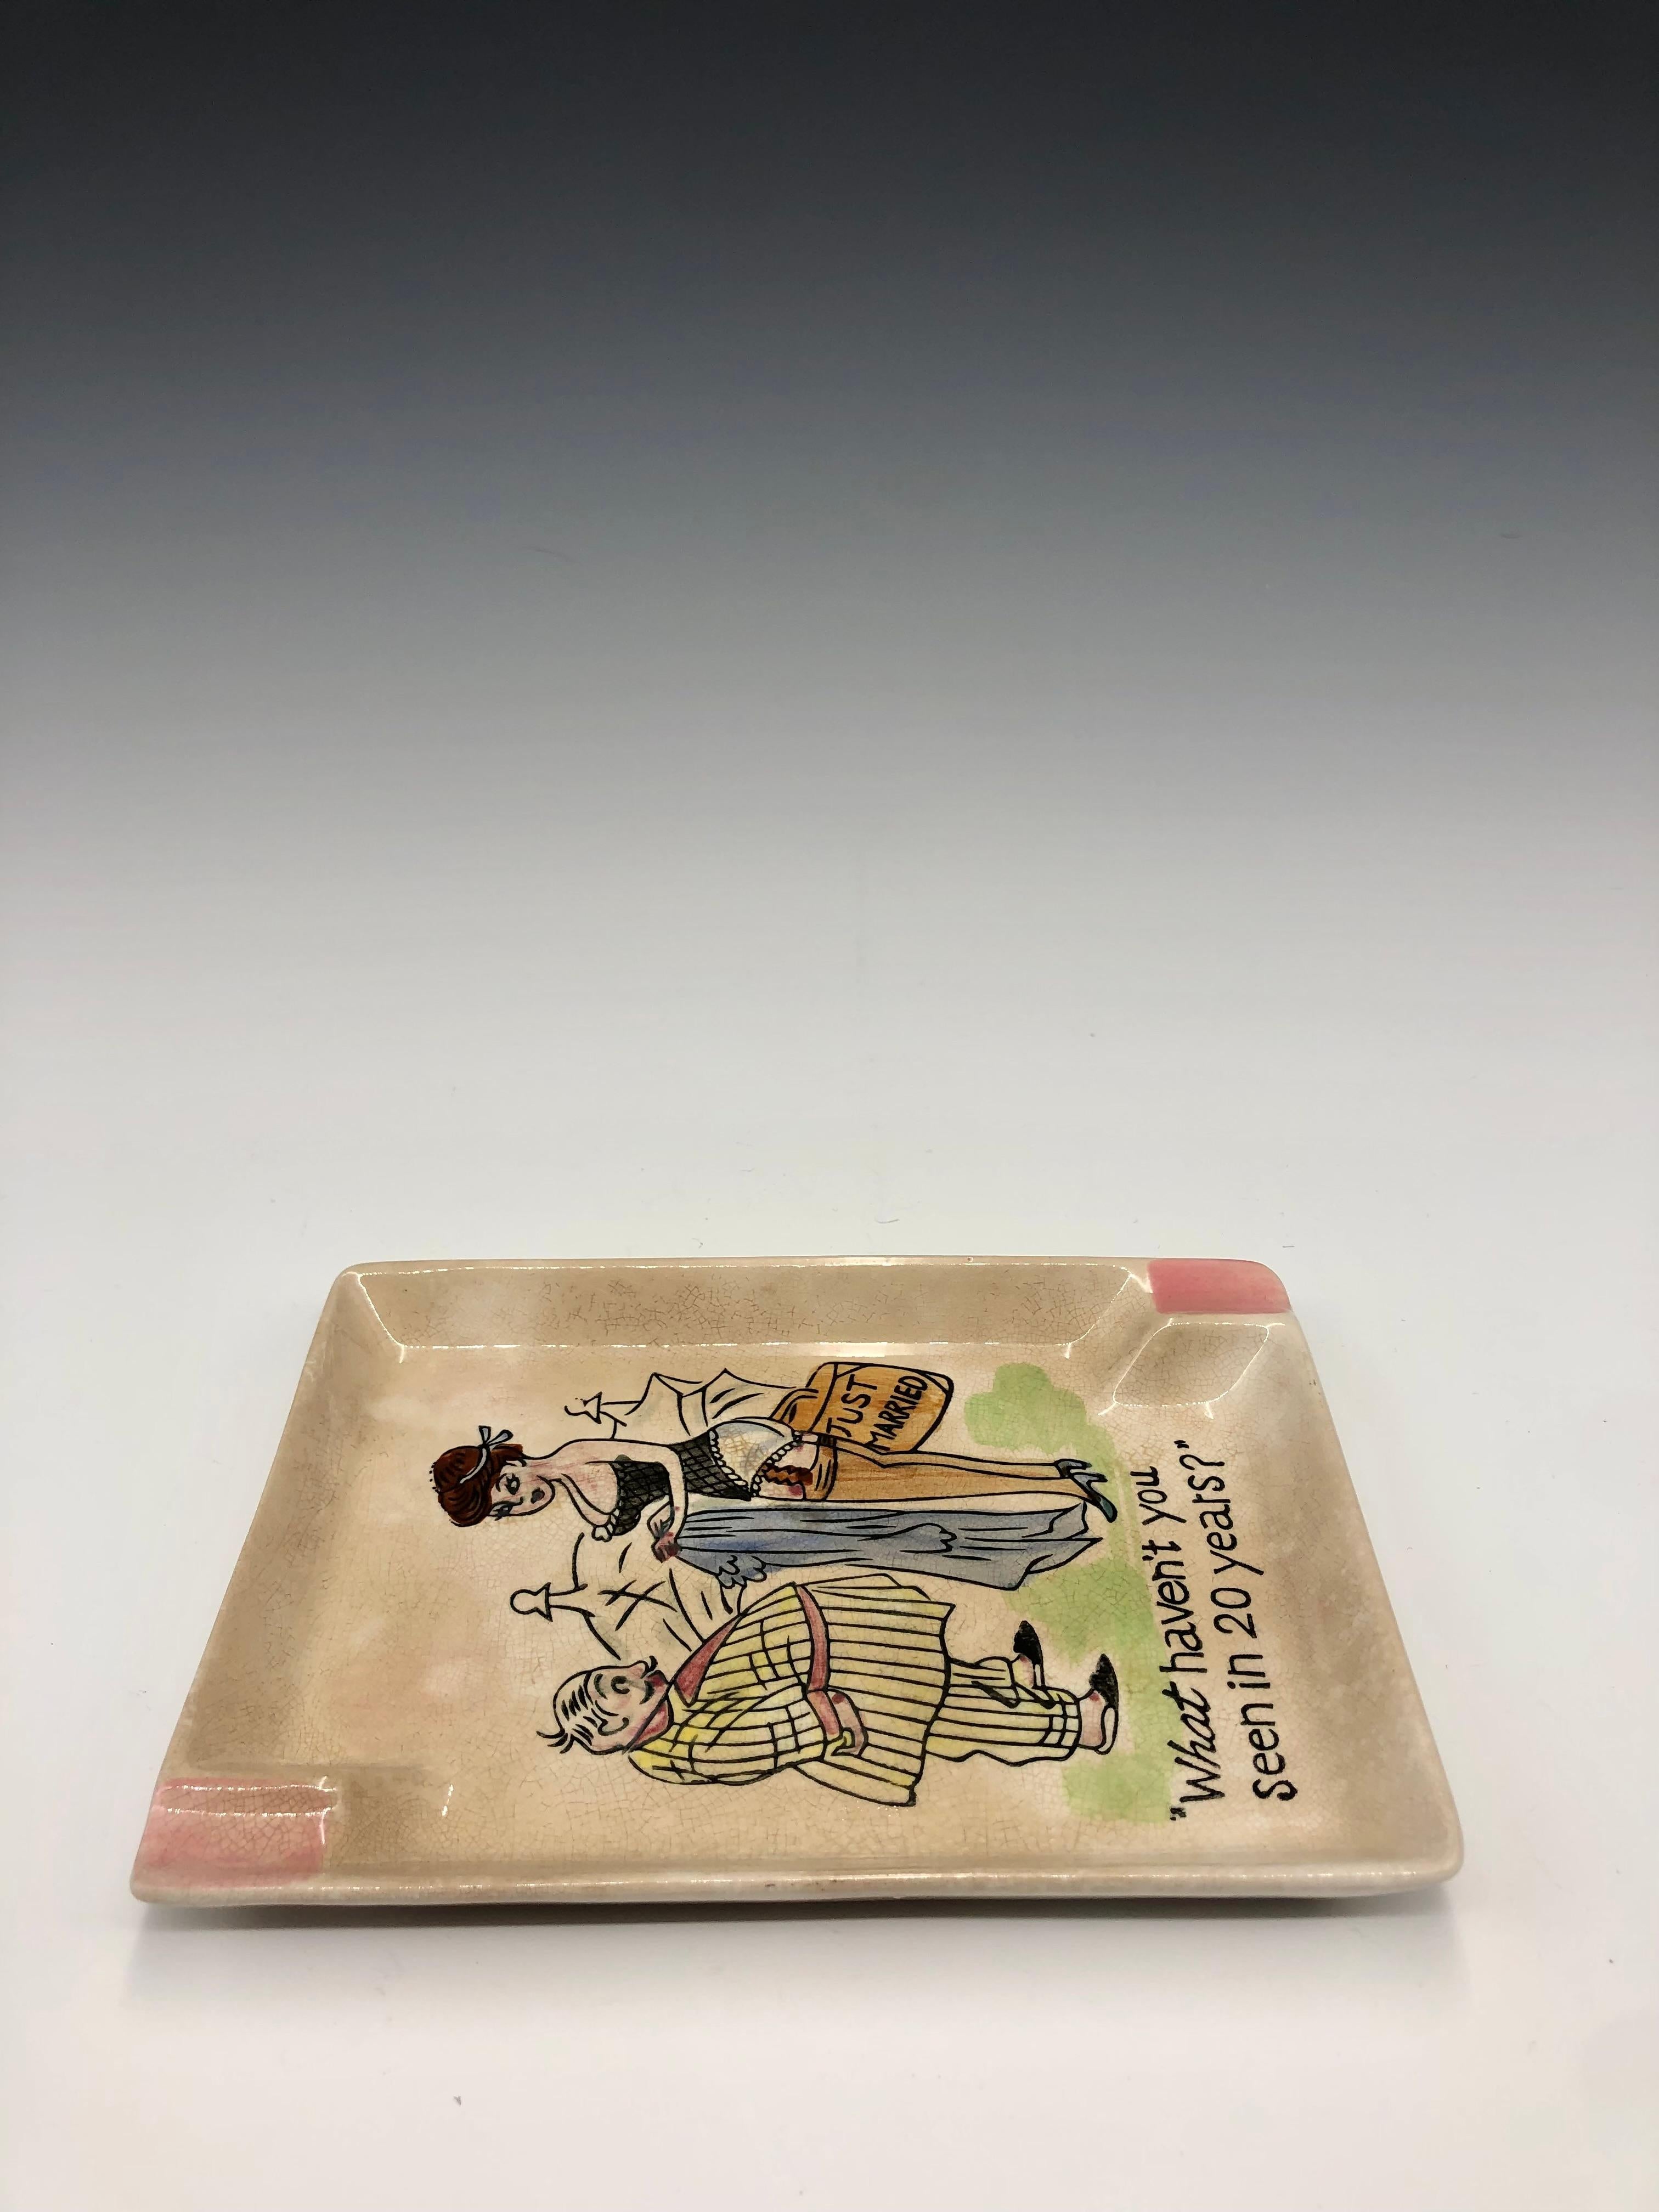 Mid-20th Century Humorous Vintage Porcelain Ashtray or Catchall For Sale